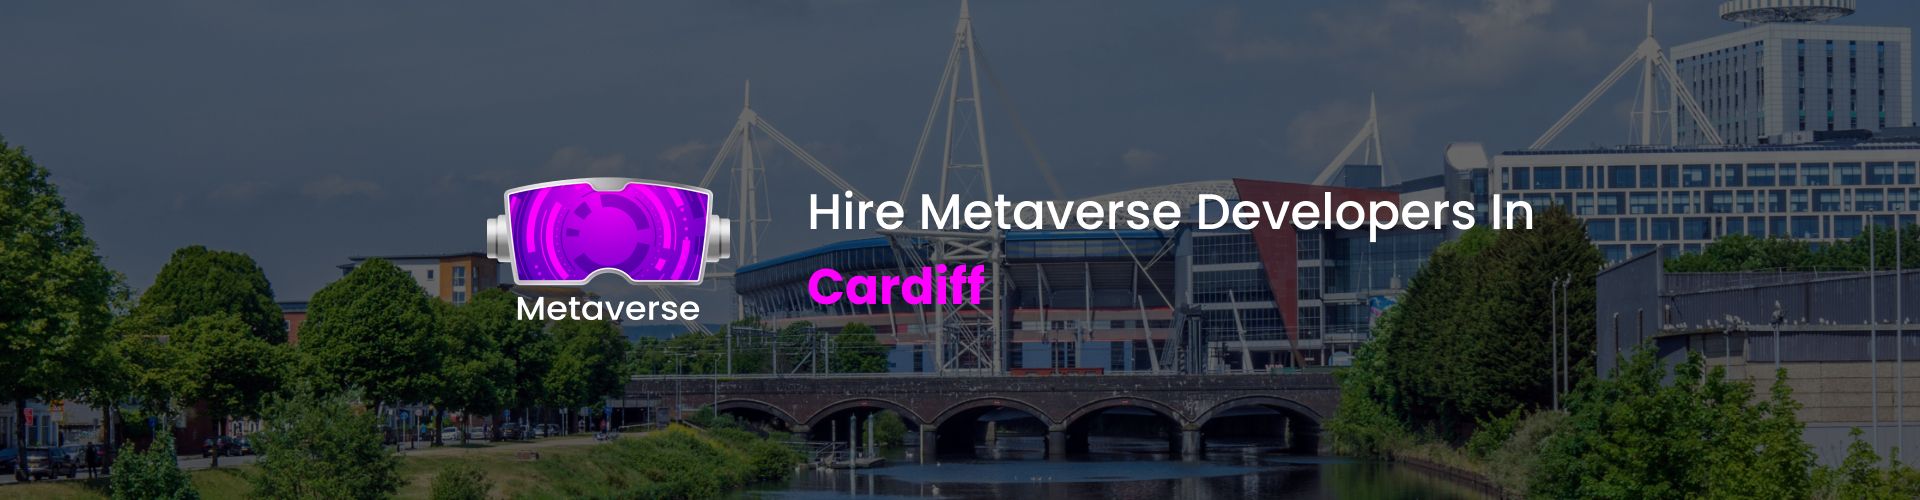 hire metaverse developers cardiff